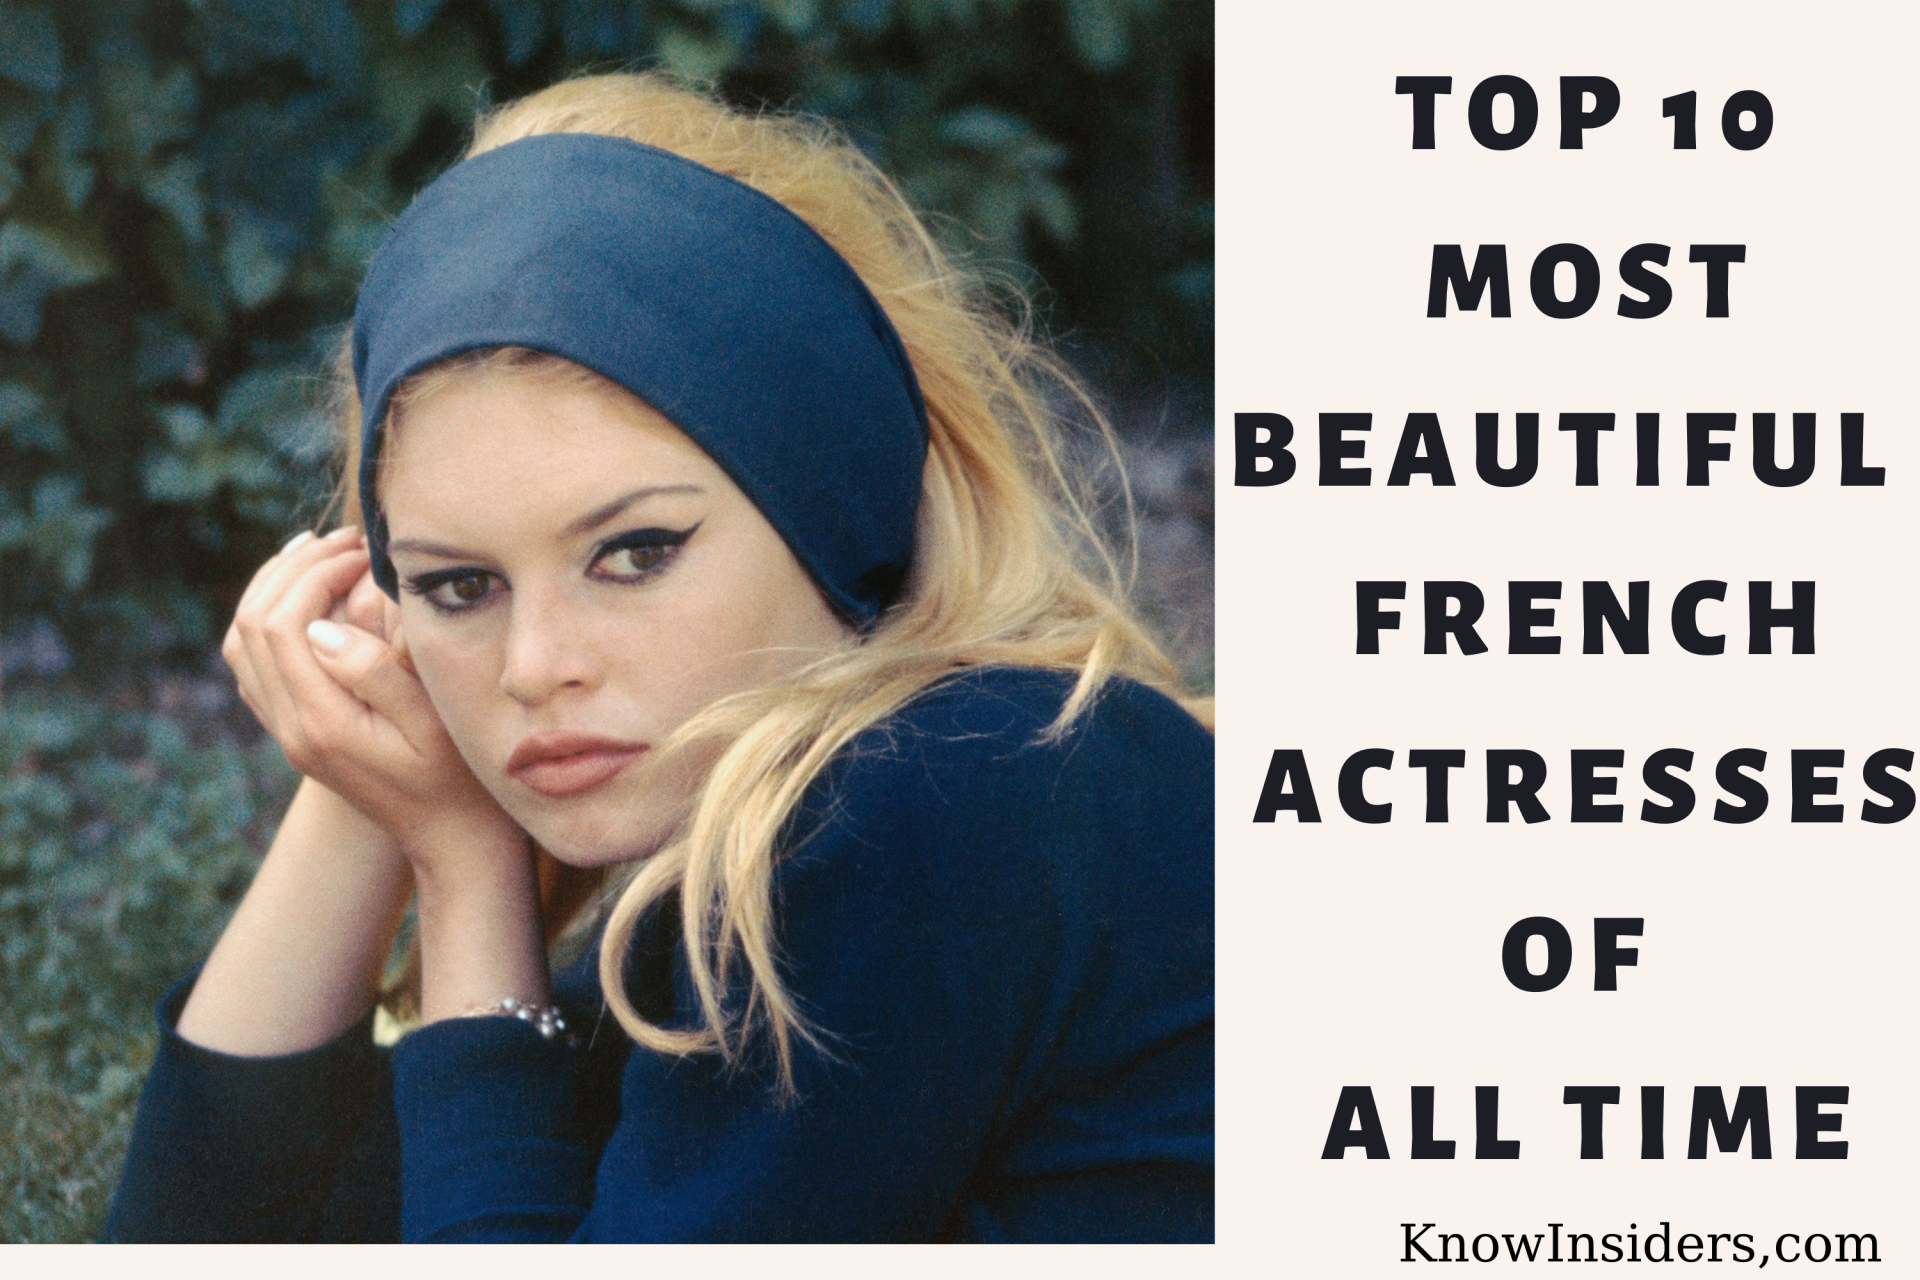 Top 10 Most Beautiful French Actresses Of All Time